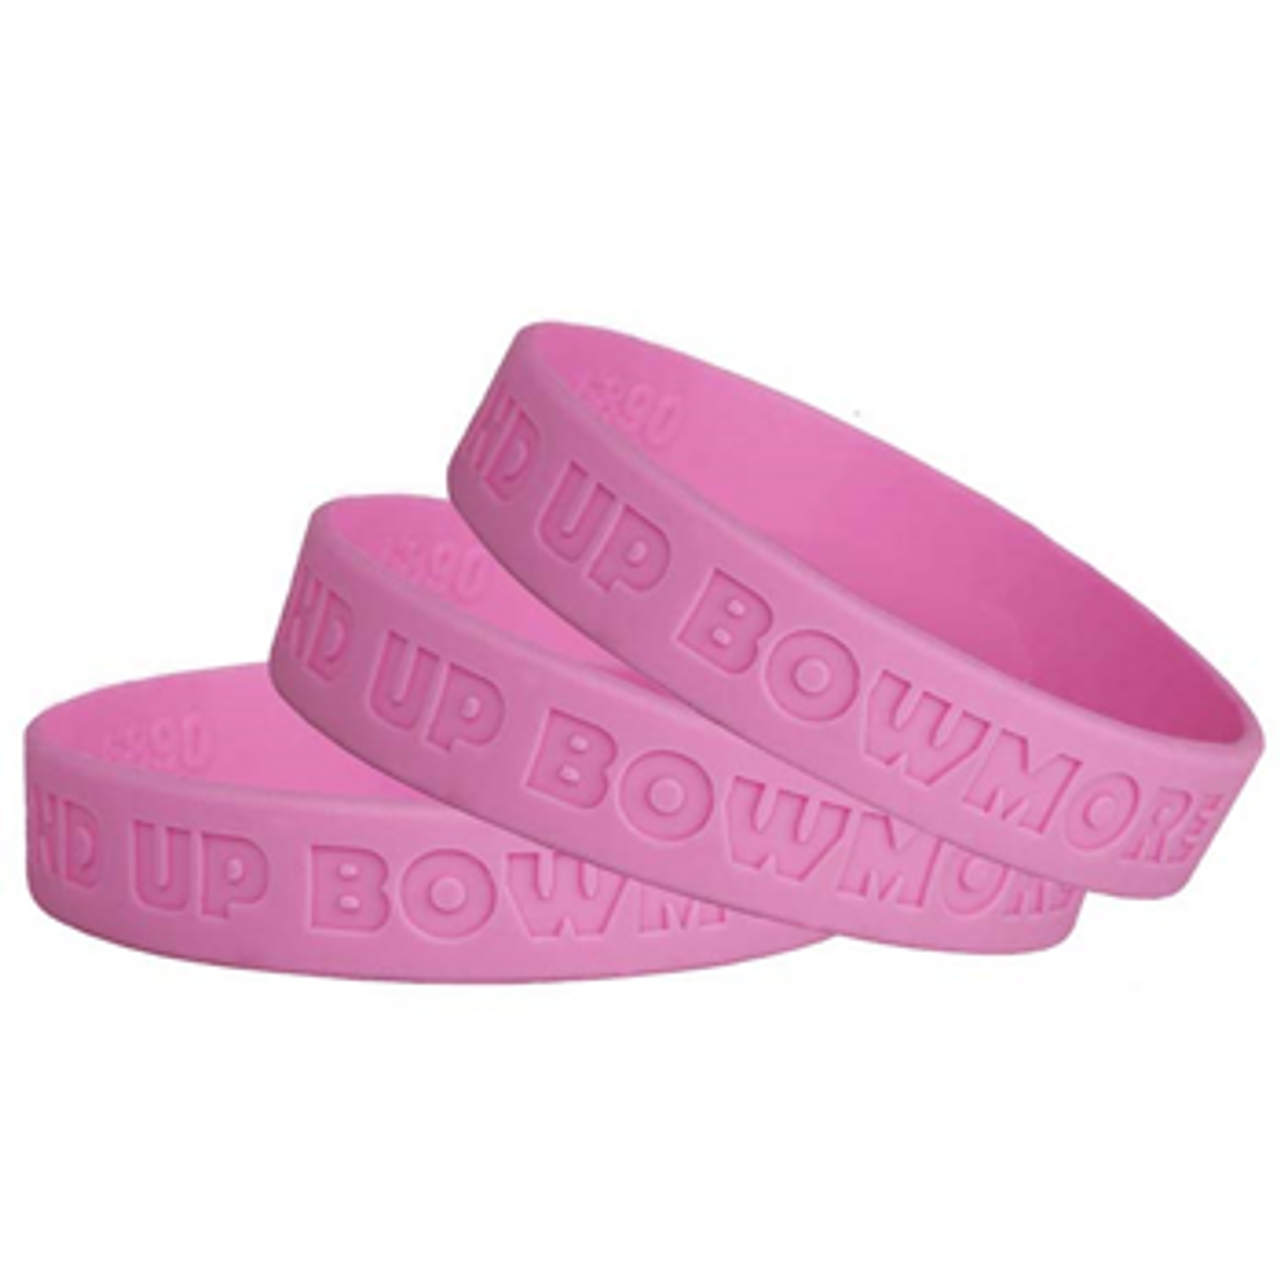 Branded Debossed Silicone Wristbands | Total Merchandise